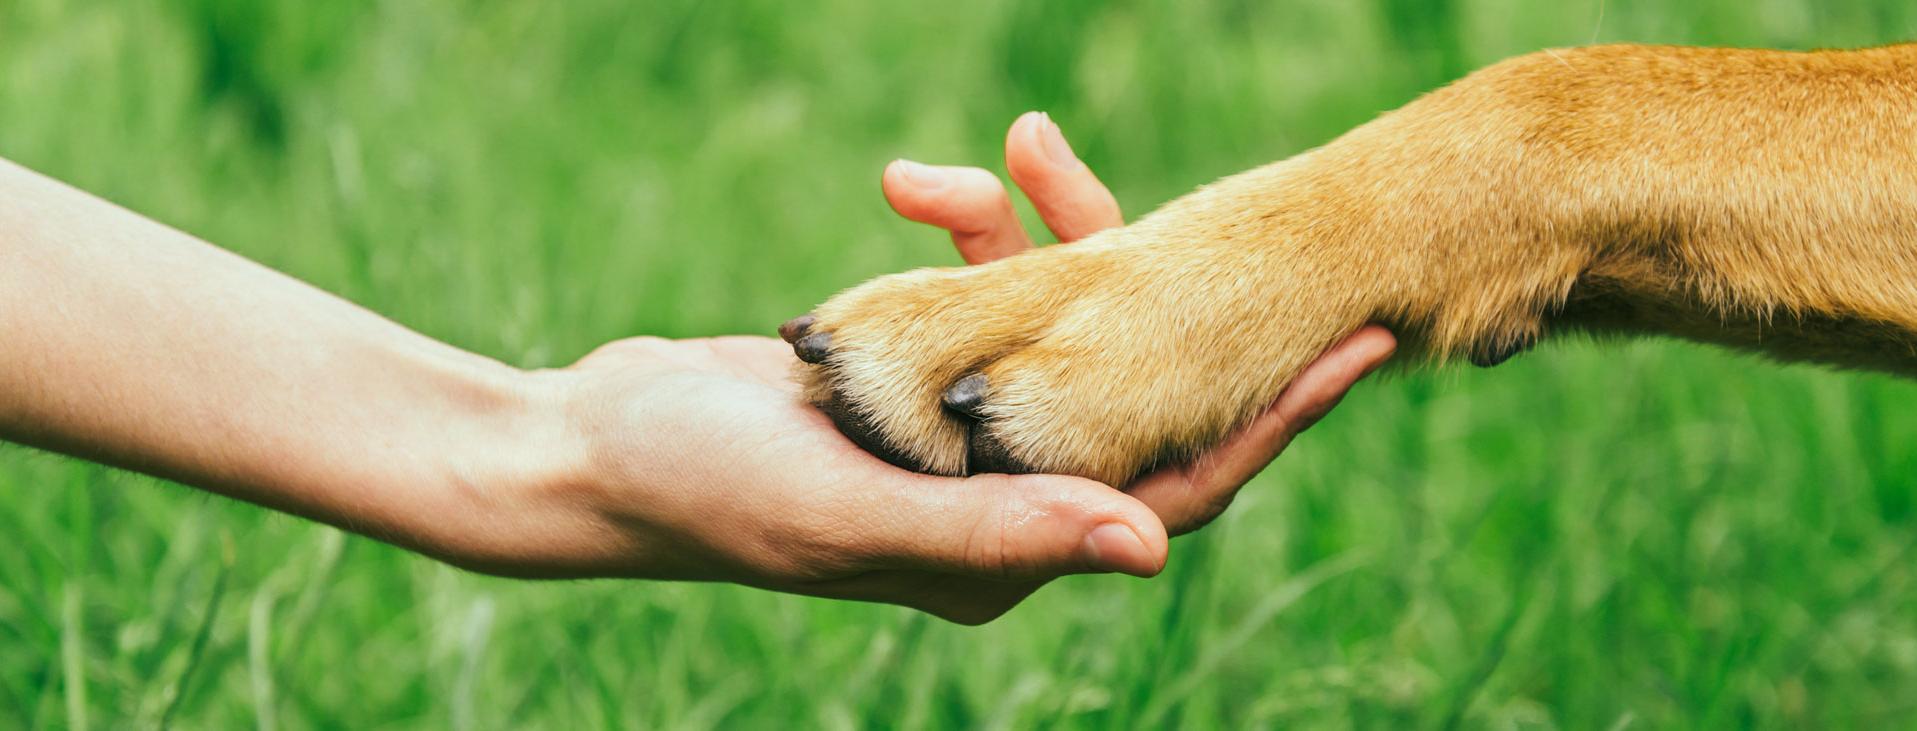 Human hand holding dog paw with grass behind them